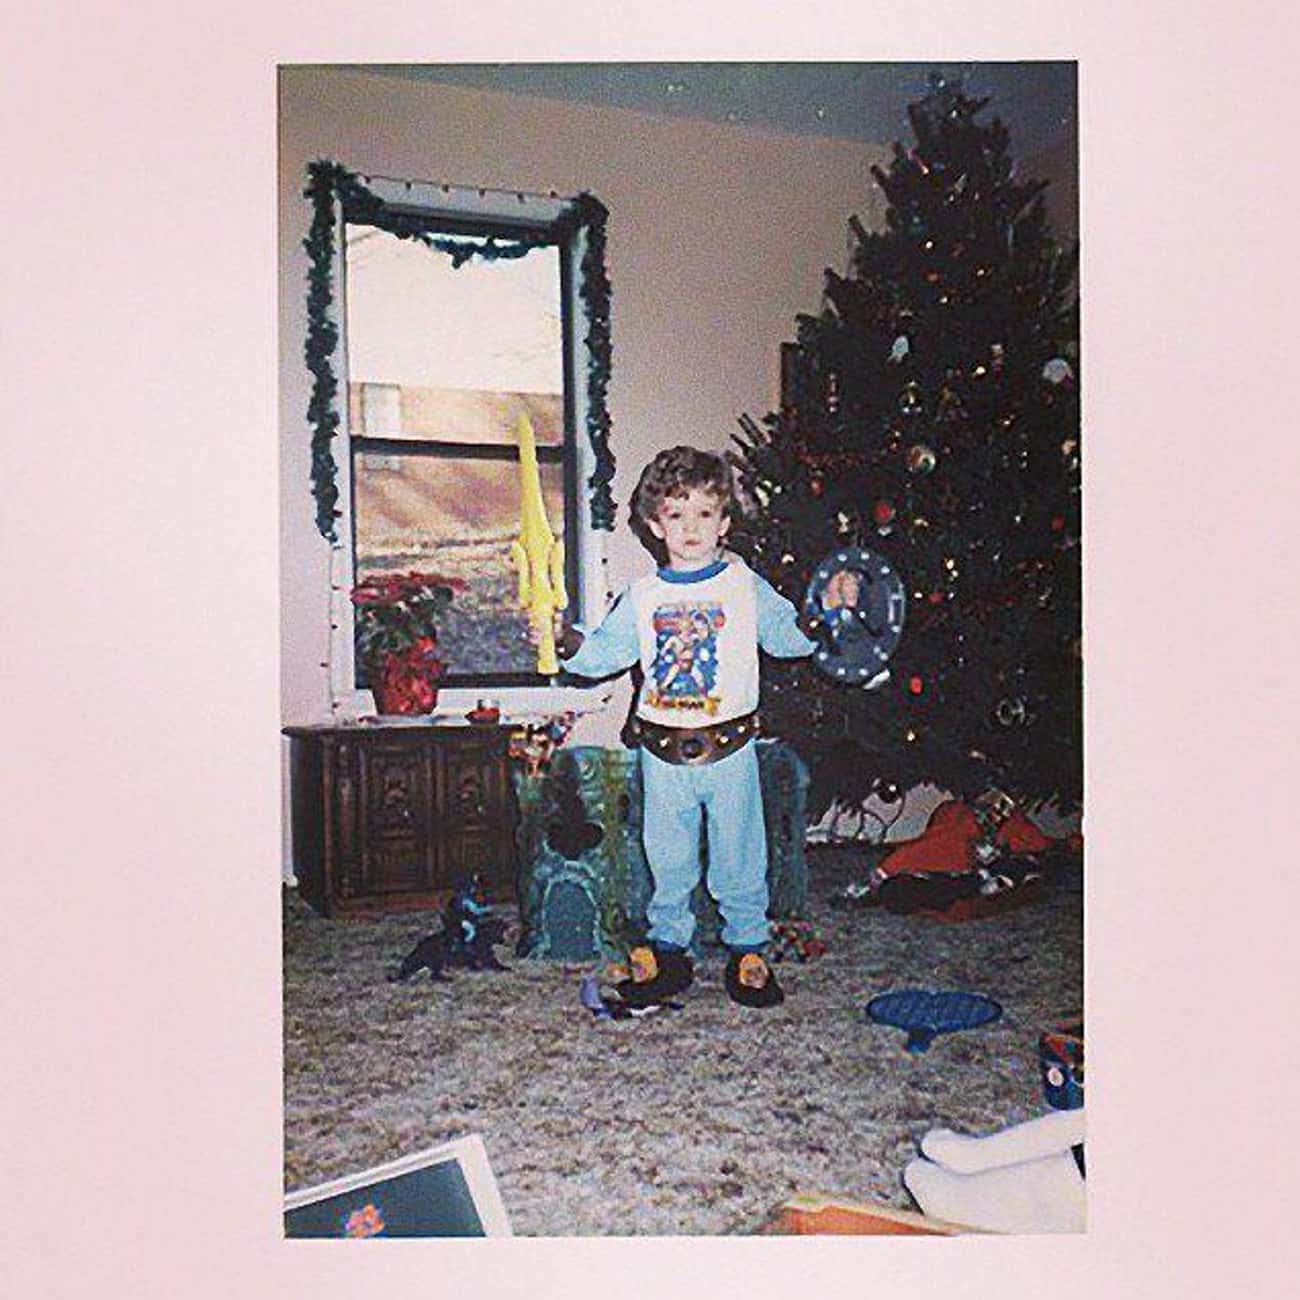 Little Justin Timberlake Cashes in on Christmas Morning